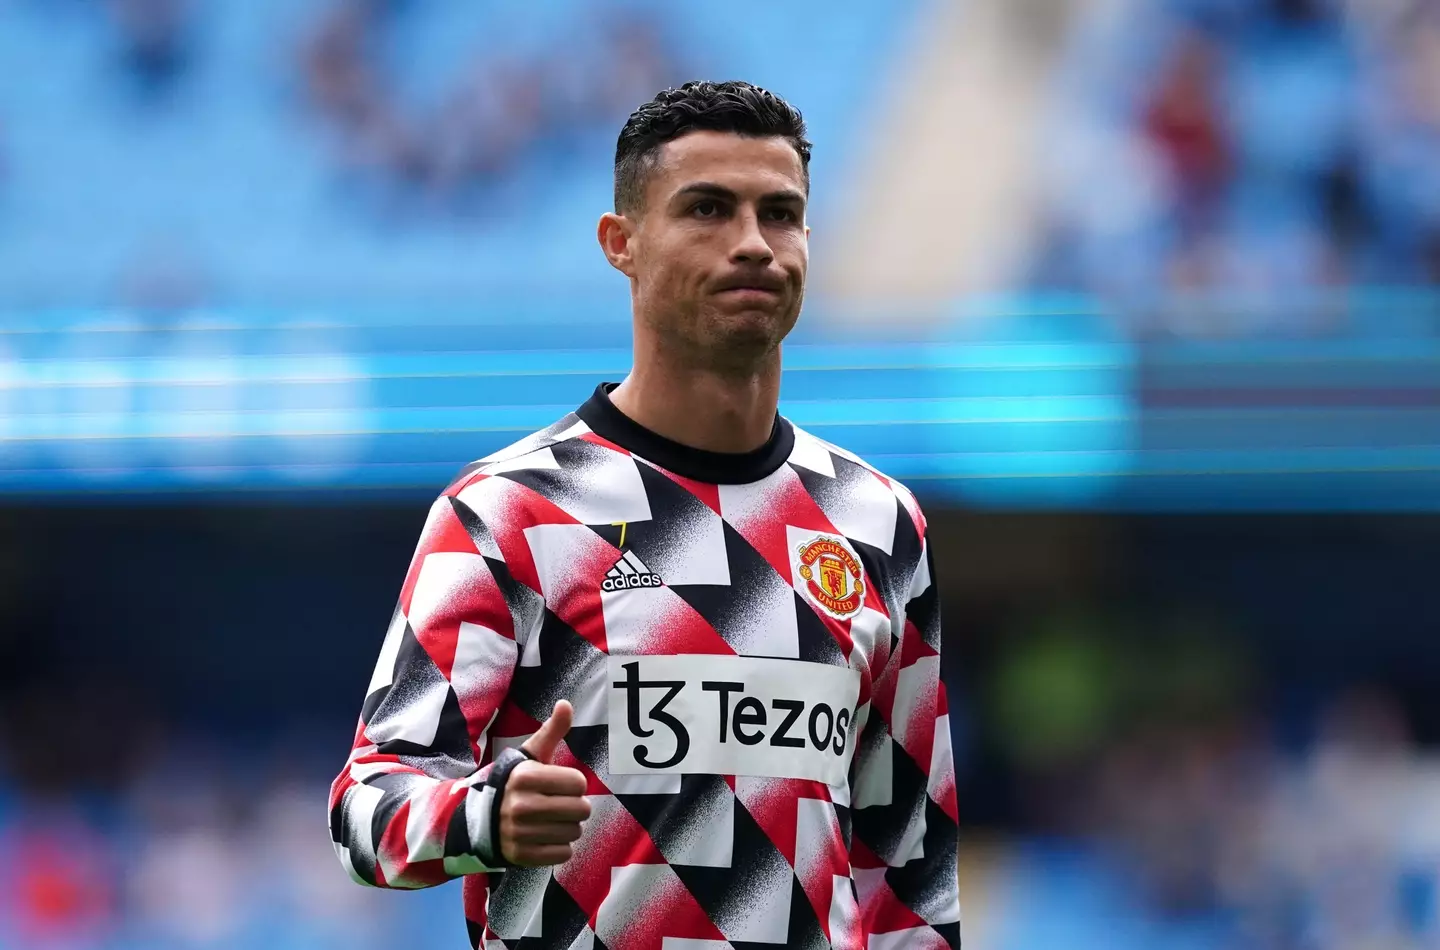 Ronaldo refused to come on as a substitute against Tottenham (Image: Alamy)